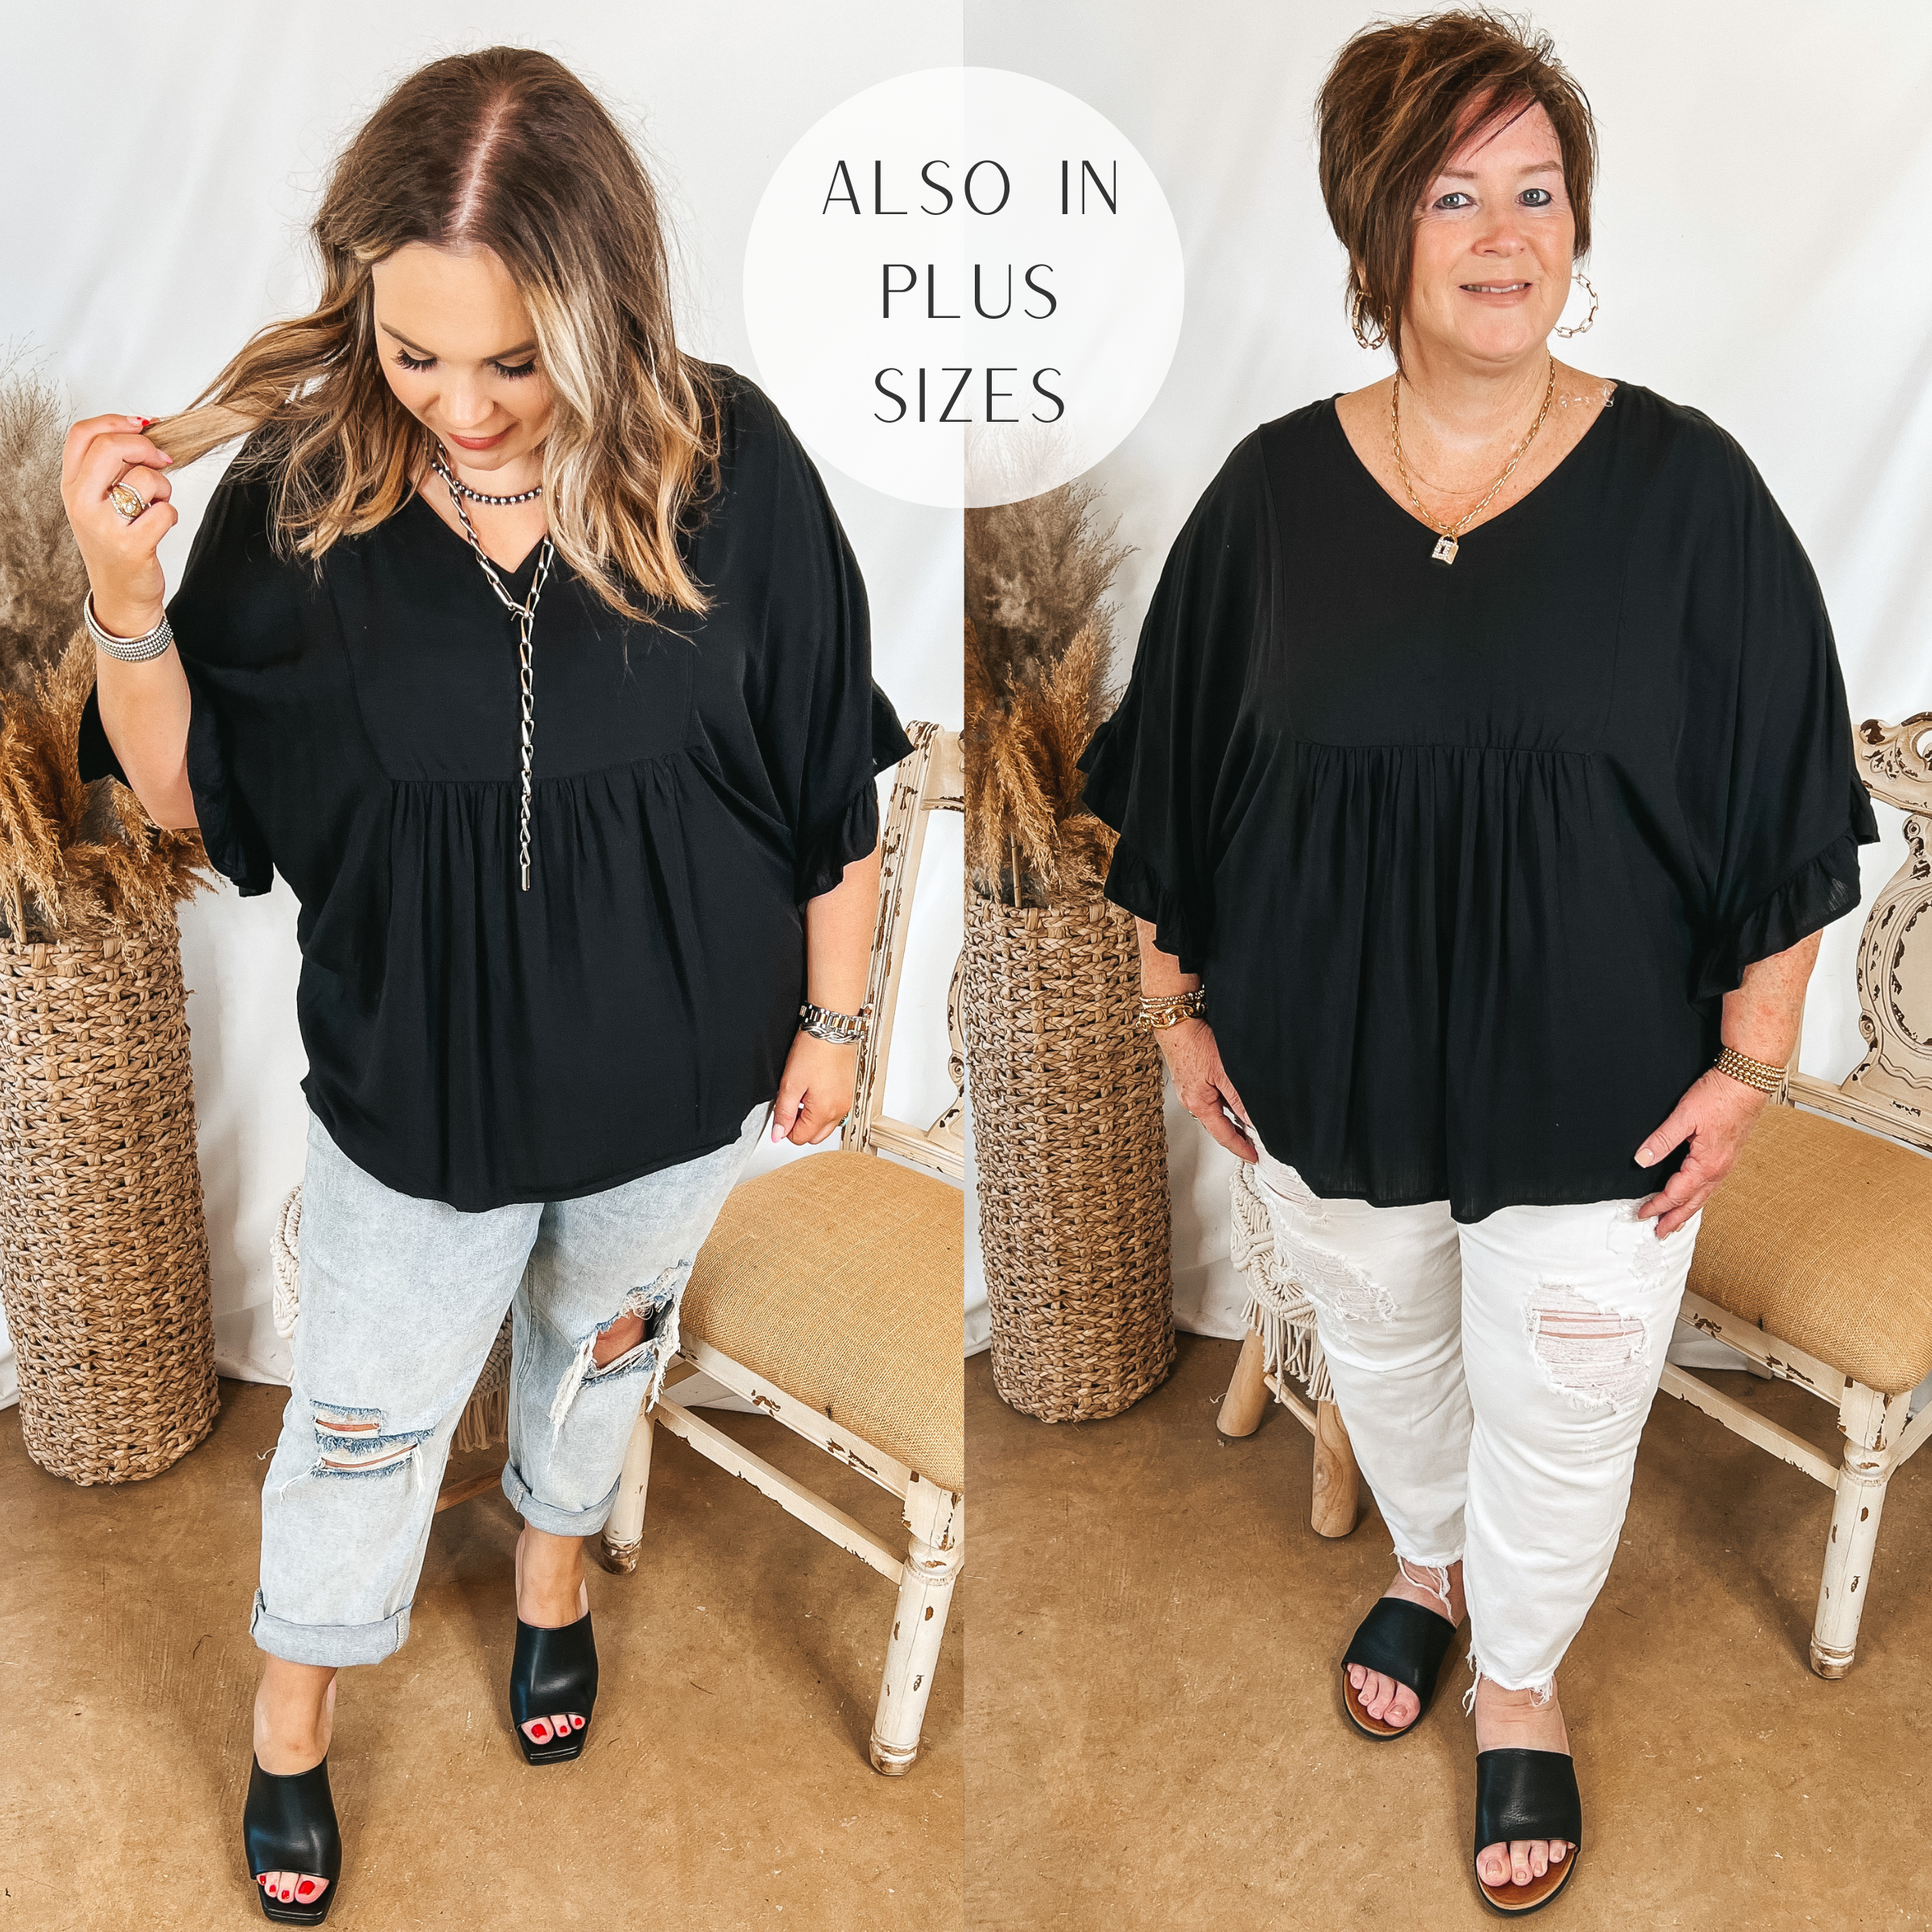 Models are wearing a black v neck top that has ruffle half sleeves. Size large model has it paired with light wash jeans, black heels, and silver jewelry. Plus size model has it paired with white jeans, black sandals, and gold jewelry.